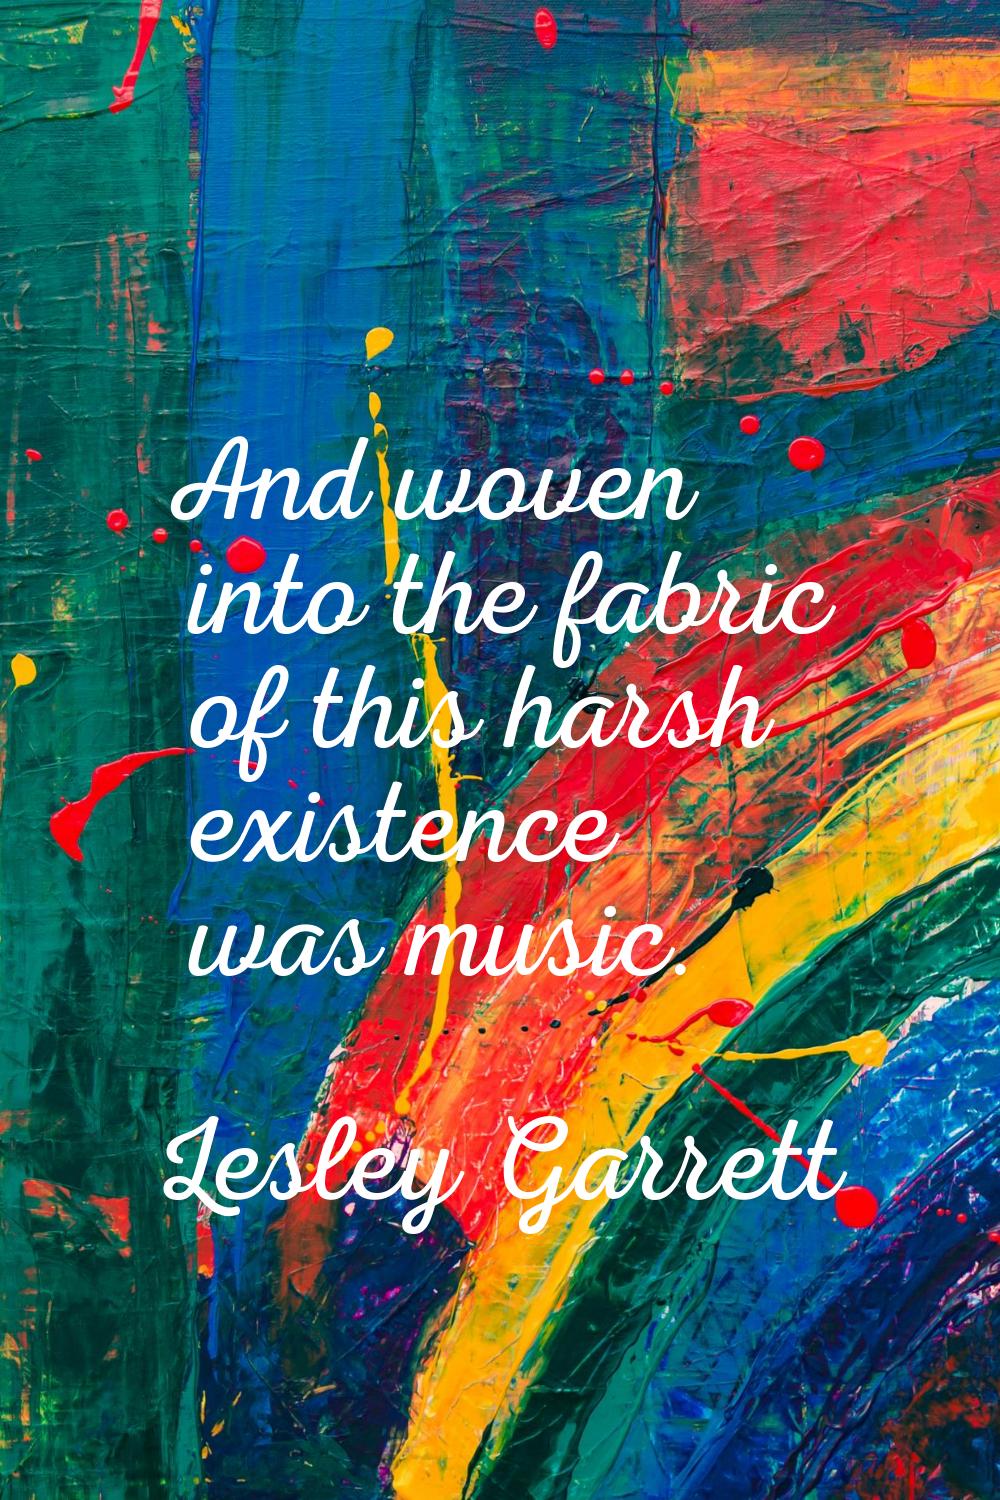 And woven into the fabric of this harsh existence was music.